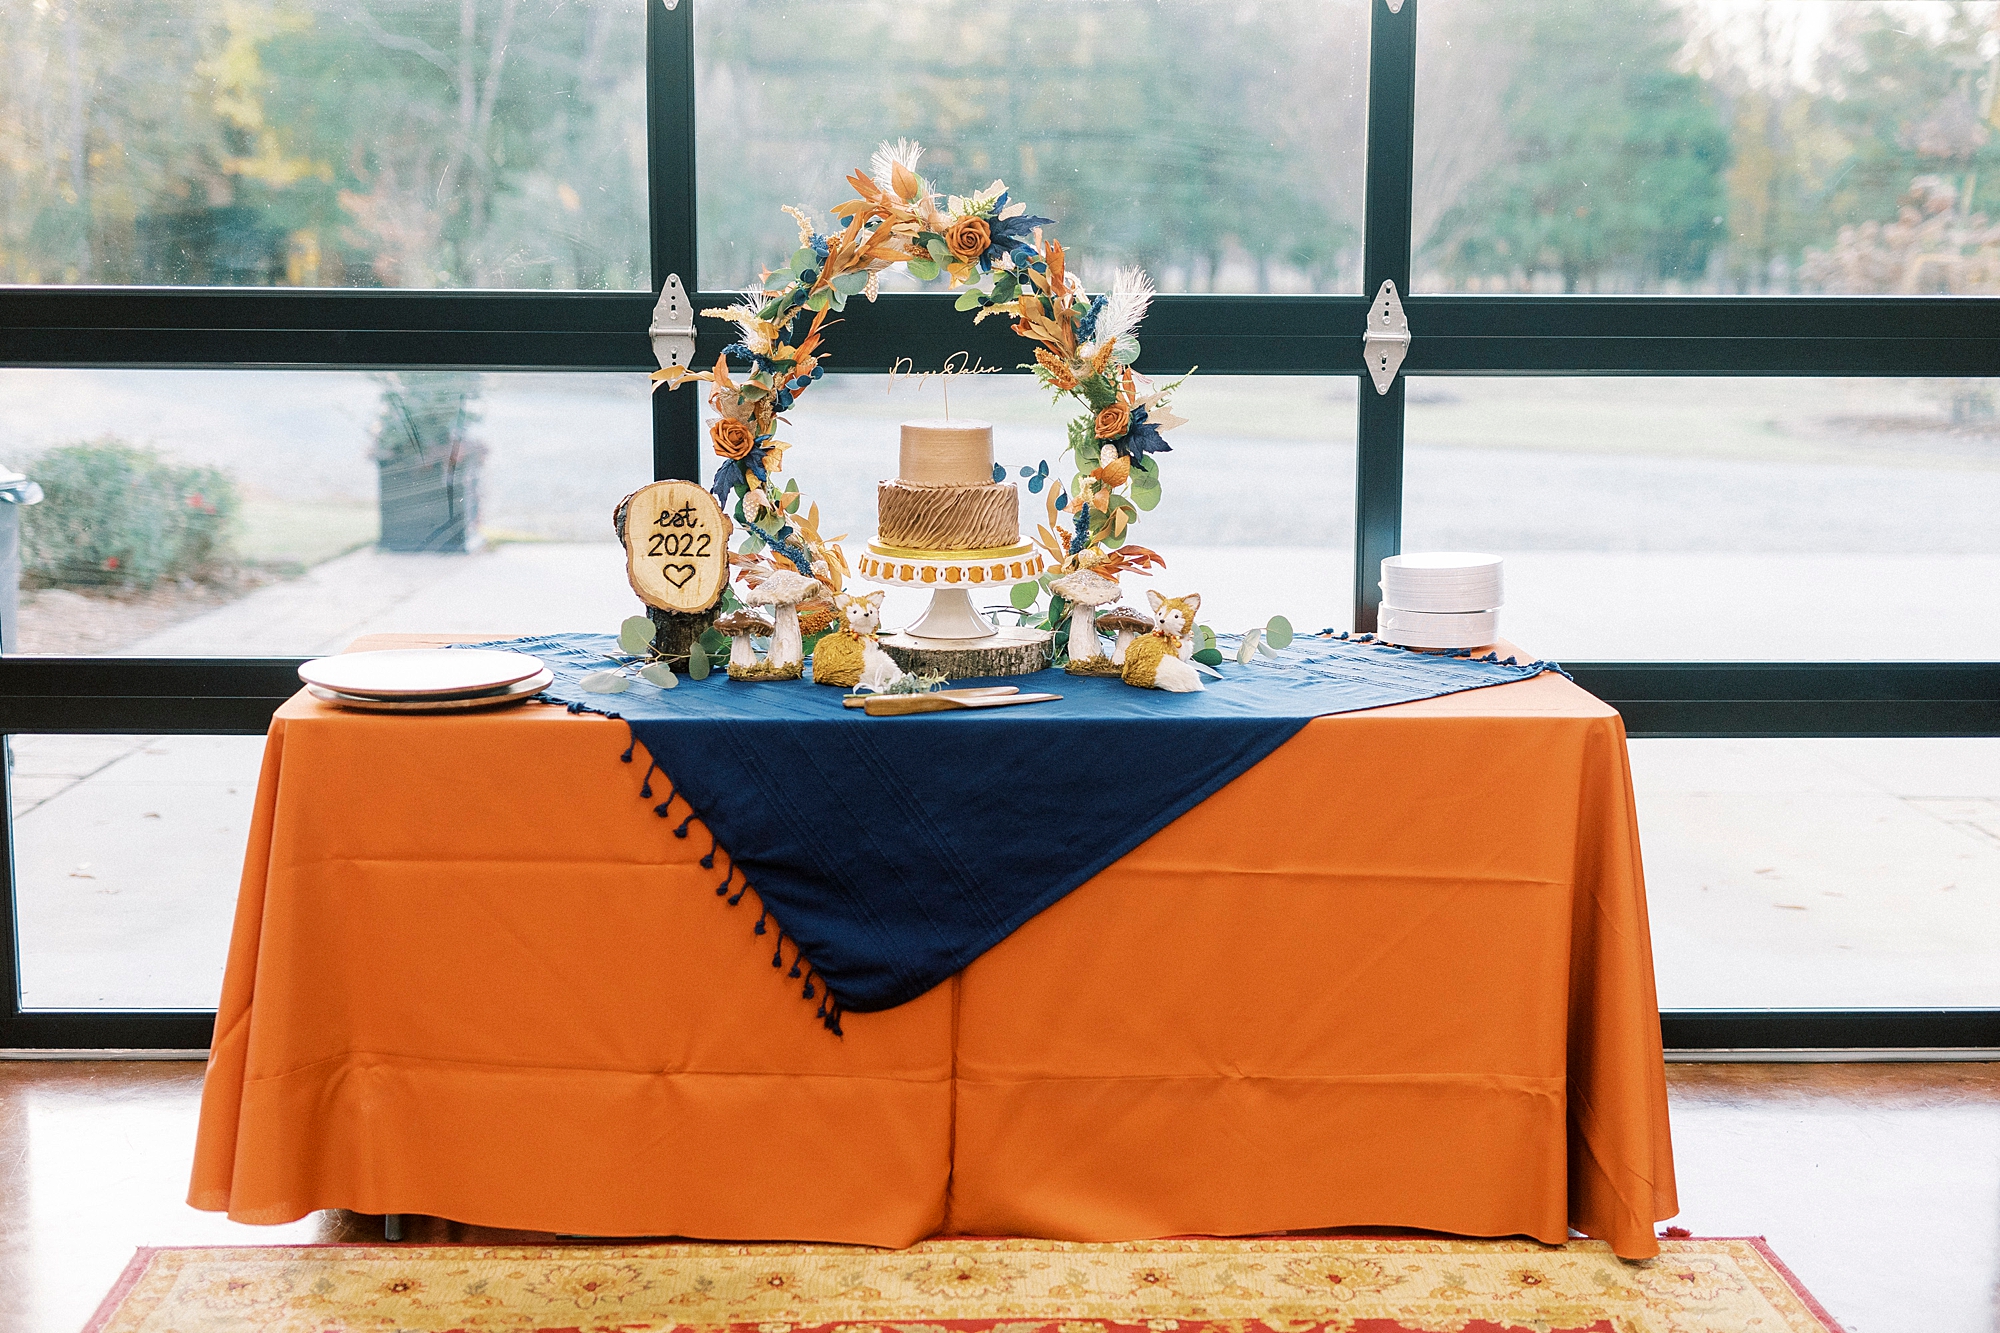 wedding cake sits on table with orange table cloth and floral arch 